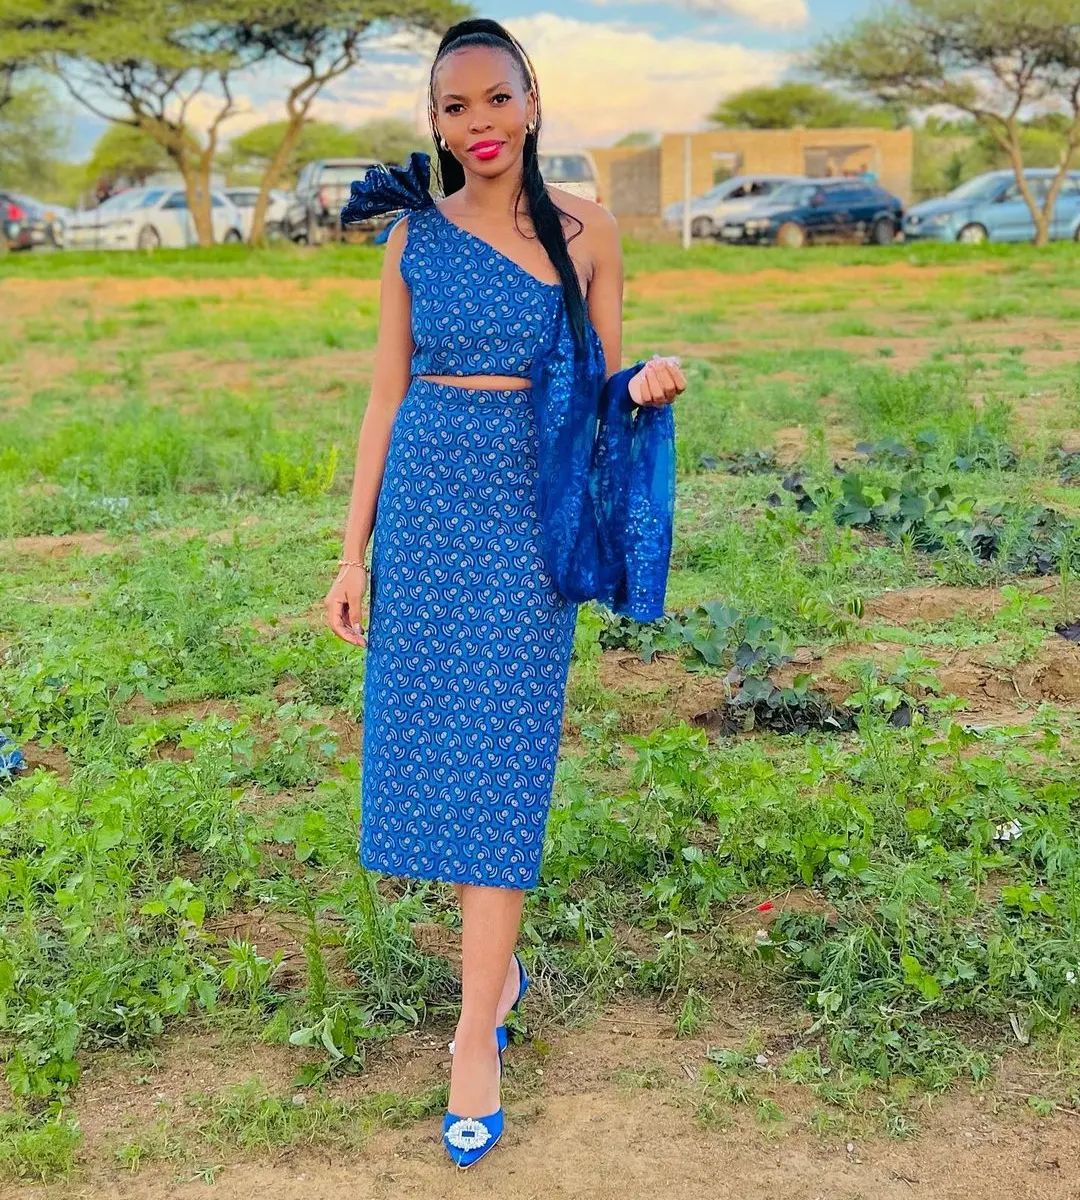 From Weddings to Everyday Wear: The Versatility of the Shweshwe Dress 21